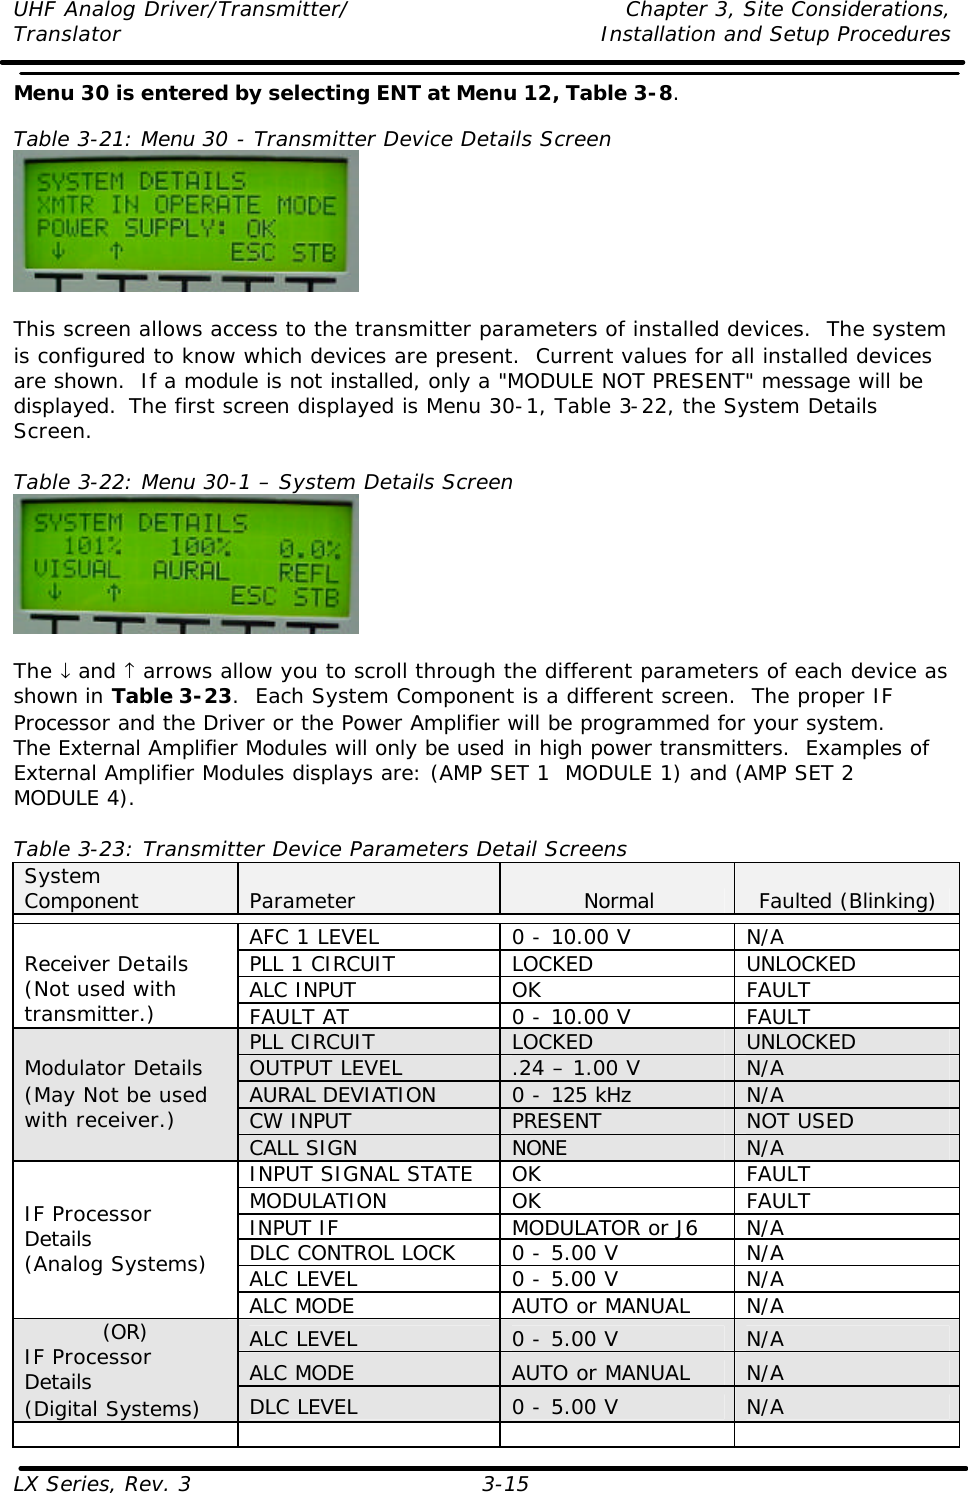 UHF Analog Driver/Transmitter/ Chapter 3, Site Considerations,  Translator Installation and Setup Procedures LX Series, Rev. 3 3-15 Menu 30 is entered by selecting ENT at Menu 12, Table 3-8.  Table 3-21: Menu 30 - Transmitter Device Details Screen   This screen allows access to the transmitter parameters of installed devices.  The system is configured to know which devices are present.  Current values for all installed devices are shown.  If a module is not installed, only a &quot;MODULE NOT PRESENT&quot; message will be displayed.  The first screen displayed is Menu 30-1, Table 3-22, the System Details Screen.  Table 3-22: Menu 30-1 – System Details Screen   The ↓ and ↑ arrows allow you to scroll through the different parameters of each device as shown in Table 3-23.  Each System Component is a different screen.  The proper IF Processor and the Driver or the Power Amplifier will be programmed for your system.  The External Amplifier Modules will only be used in high power transmitters.  Examples of External Amplifier Modules displays are: (AMP SET 1  MODULE 1) and (AMP SET 2  MODULE 4).  Table 3-23: Transmitter Device Parameters Detail Screens System Component Parameter Normal Faulted (Blinking)  AFC 1 LEVEL 0 - 10.00 V N/A PLL 1 CIRCUIT LOCKED UNLOCKED ALC INPUT OK FAULT Receiver Details (Not used with transmitter.) FAULT AT 0 - 10.00 V FAULT PLL CIRCUIT LOCKED UNLOCKED OUTPUT LEVEL .24 – 1.00 V N/A AURAL DEVIATION  0 - 125 kHz N/A CW INPUT PRESENT NOT USED Modulator Details (May Not be used with receiver.) CALL SIGN NONE N/A INPUT SIGNAL STATE OK FAULT MODULATION OK FAULT INPUT IF MODULATOR or J6 N/A DLC CONTROL LOCK 0 - 5.00 V N/A ALC LEVEL 0 - 5.00 V N/A IF Processor Details (Analog Systems) ALC MODE AUTO or MANUAL N/A ALC LEVEL 0 - 5.00 V N/A ALC MODE AUTO or MANUAL N/A (OR) IF Processor Details (Digital Systems) DLC LEVEL 0 - 5.00 V N/A        